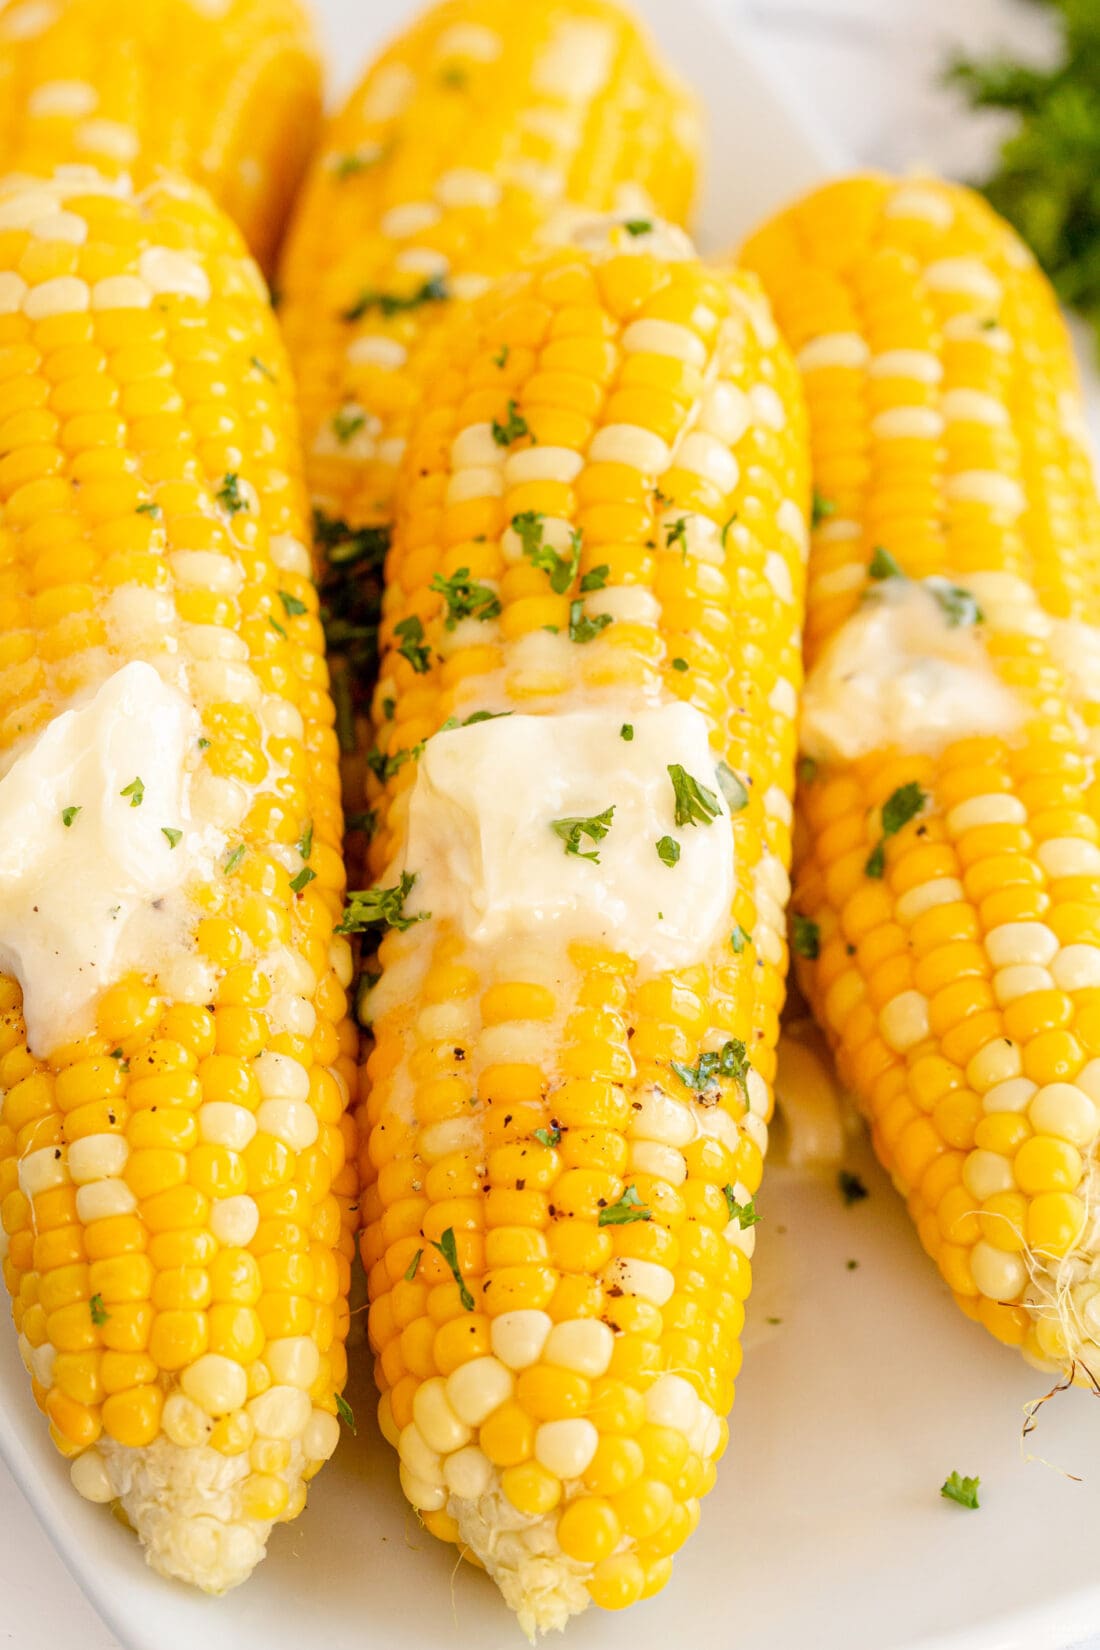 Grilled Corn on the Cob with butter